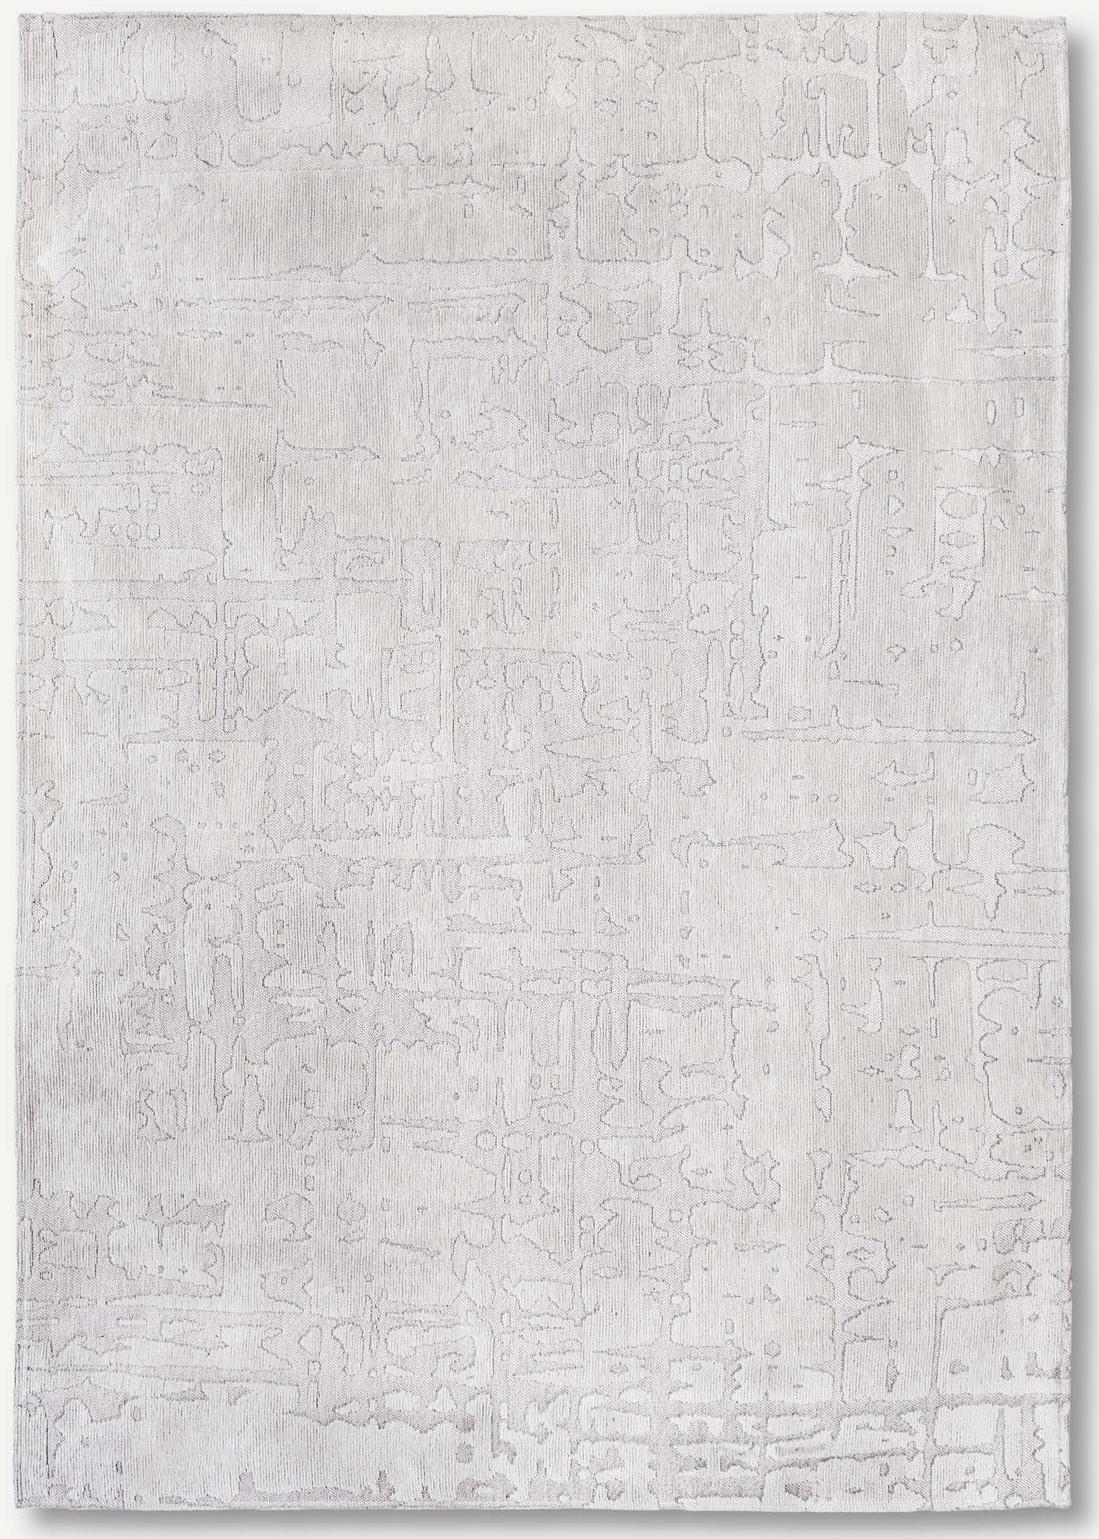 Abstract Silver Belgian Rug ☞ Size: 2' 7" x 5' (80 x 150 cm)